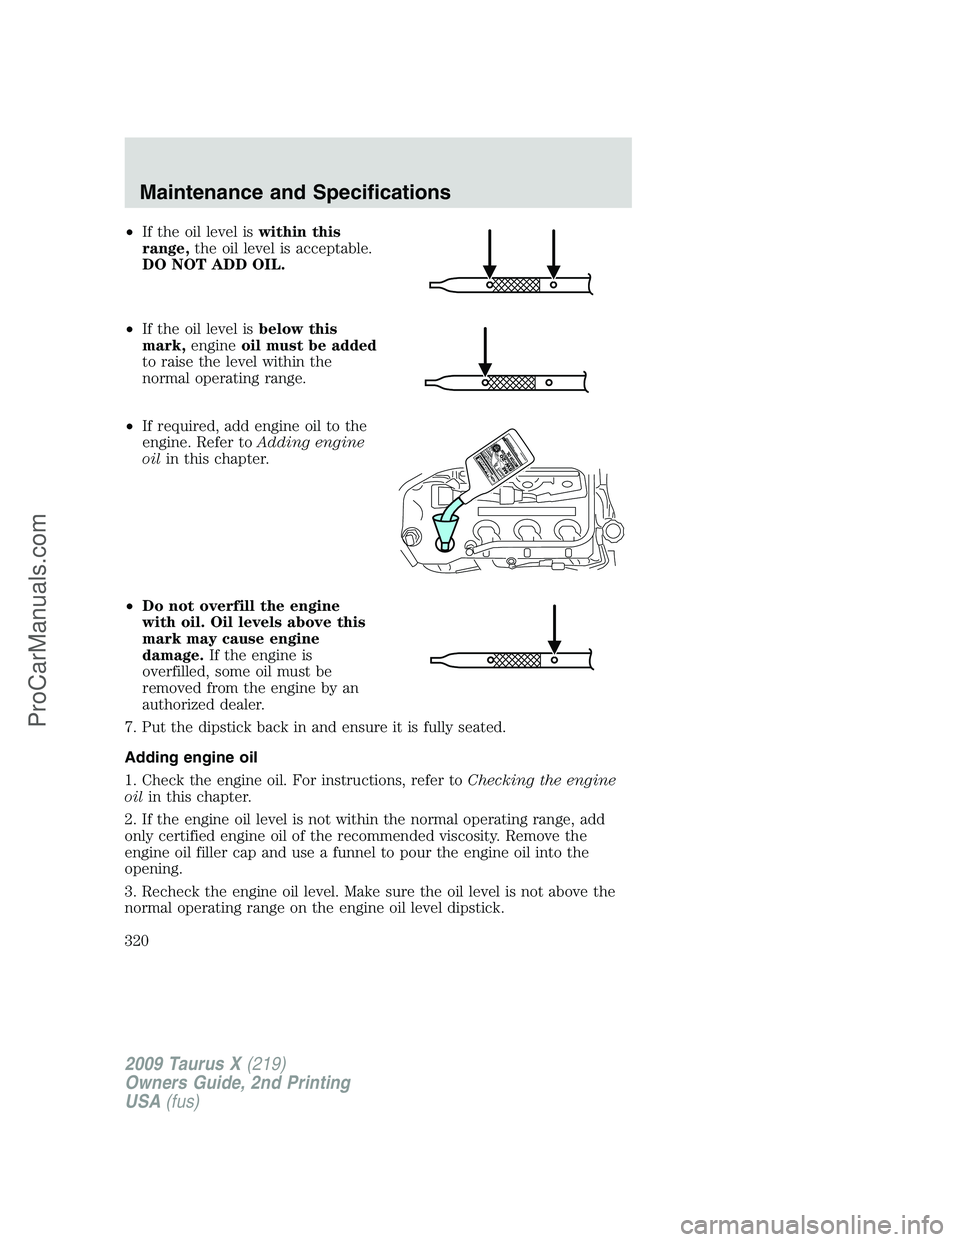 FORD FREESTYLE 2009  Owners Manual •If the oil level iswithin this
range,the oil level is acceptable.
DO NOT ADD OIL.
•If the oil level isbelow this
mark,engineoil must be added
to raise the level within the
normal operating range.